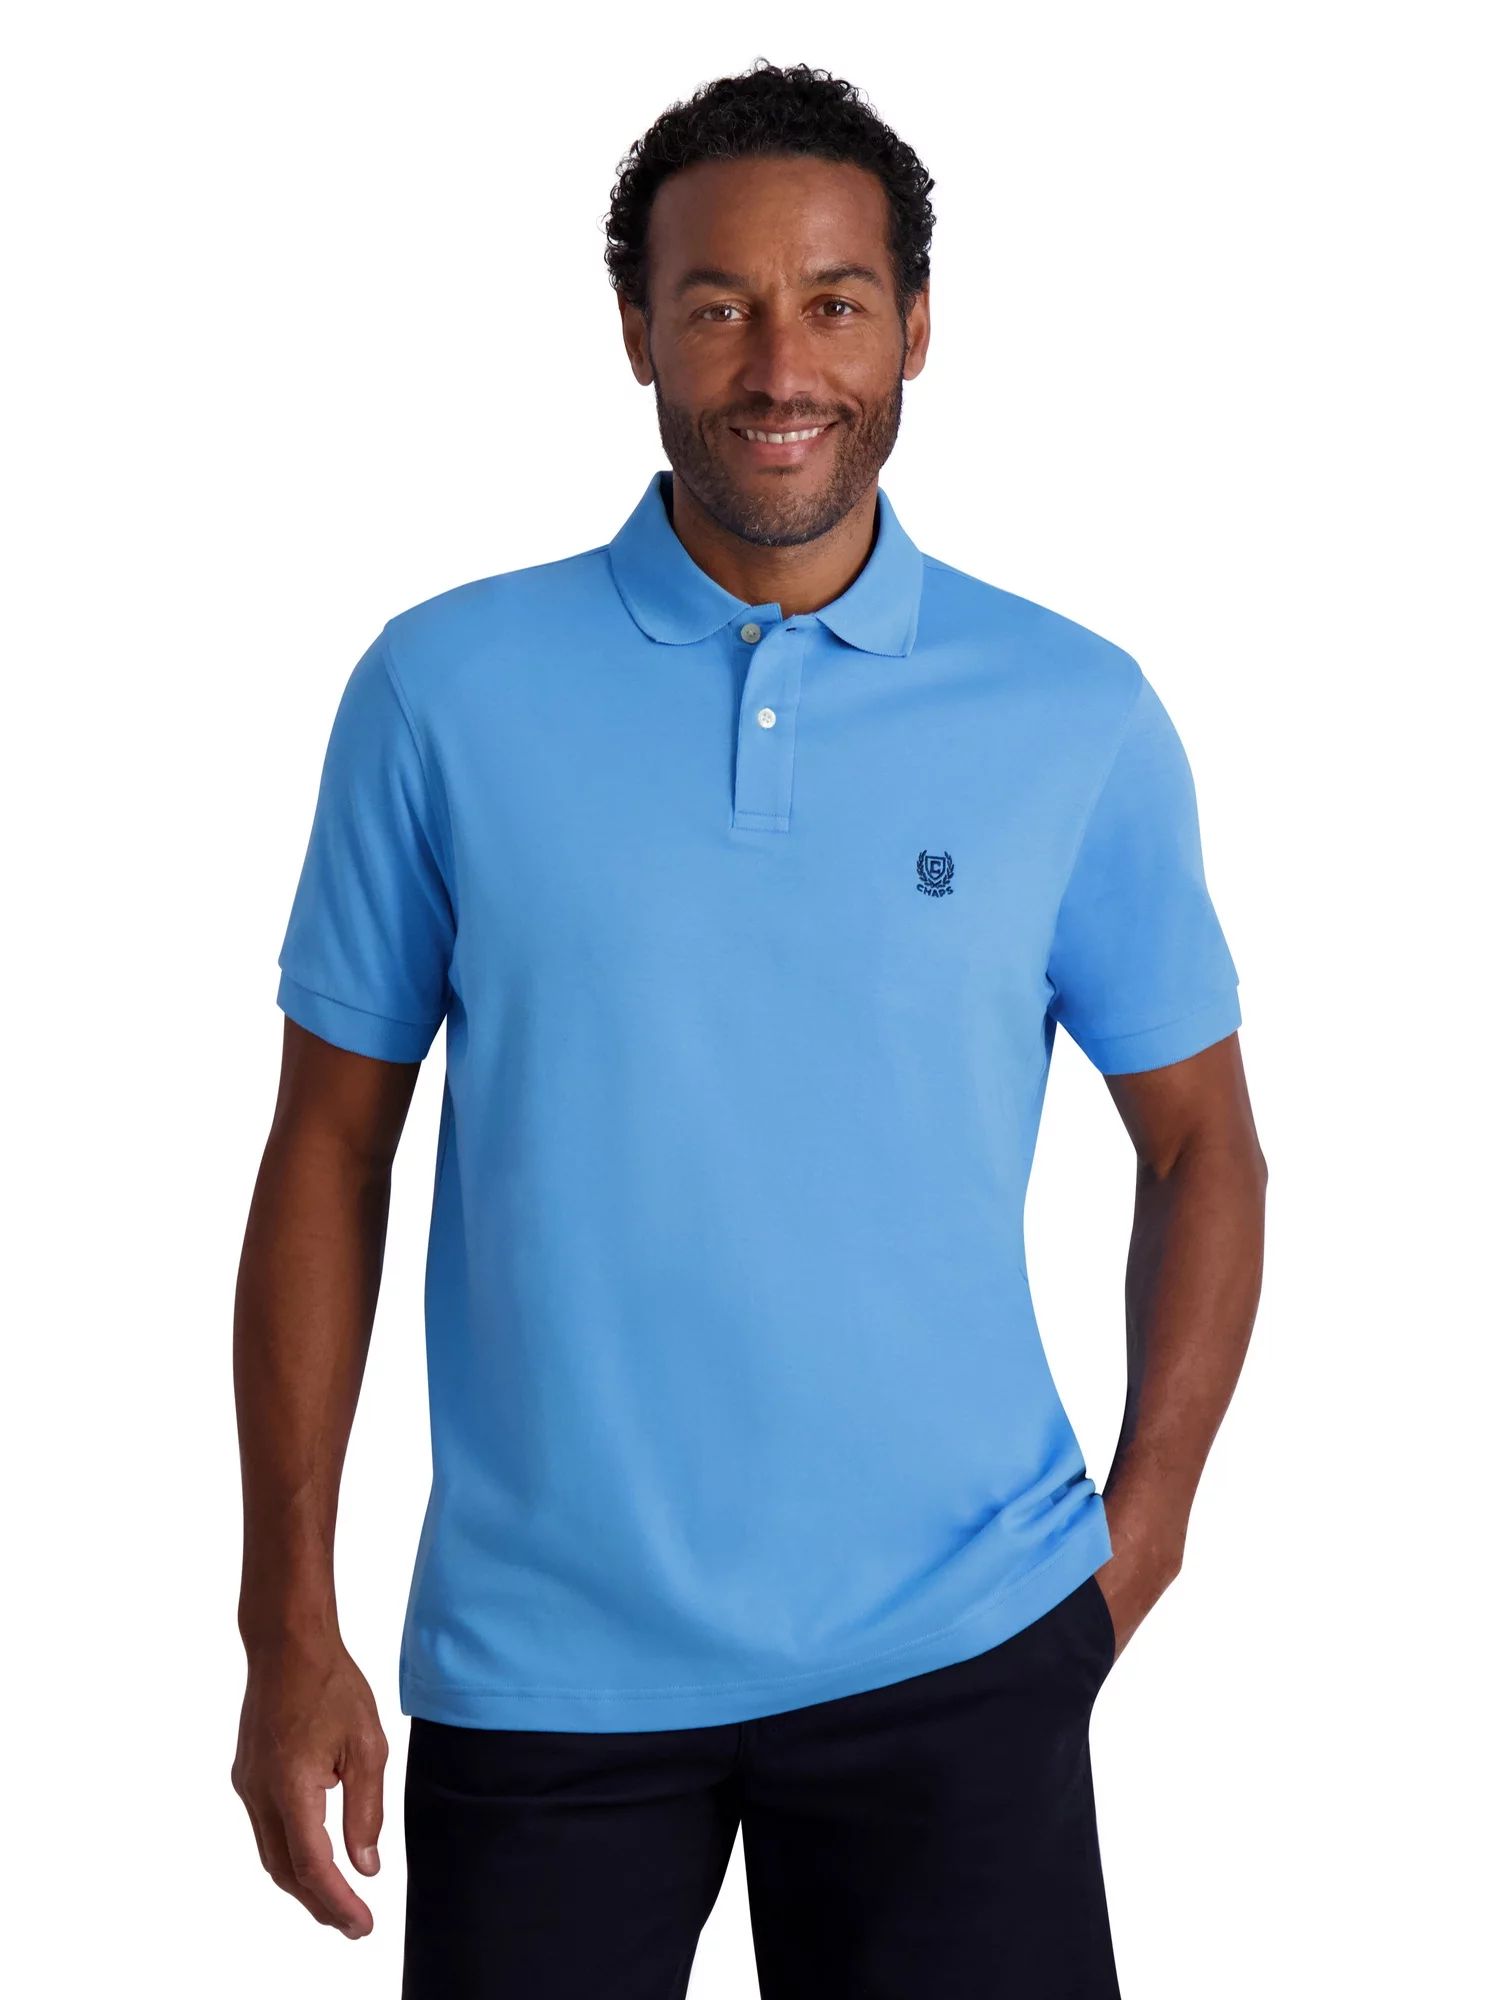 Chaps Men's Classic Fit Short Sleeve Cotton Solid Interlock Jersey Polo Shirt Sizes XS up to 4XB | Walmart (US)